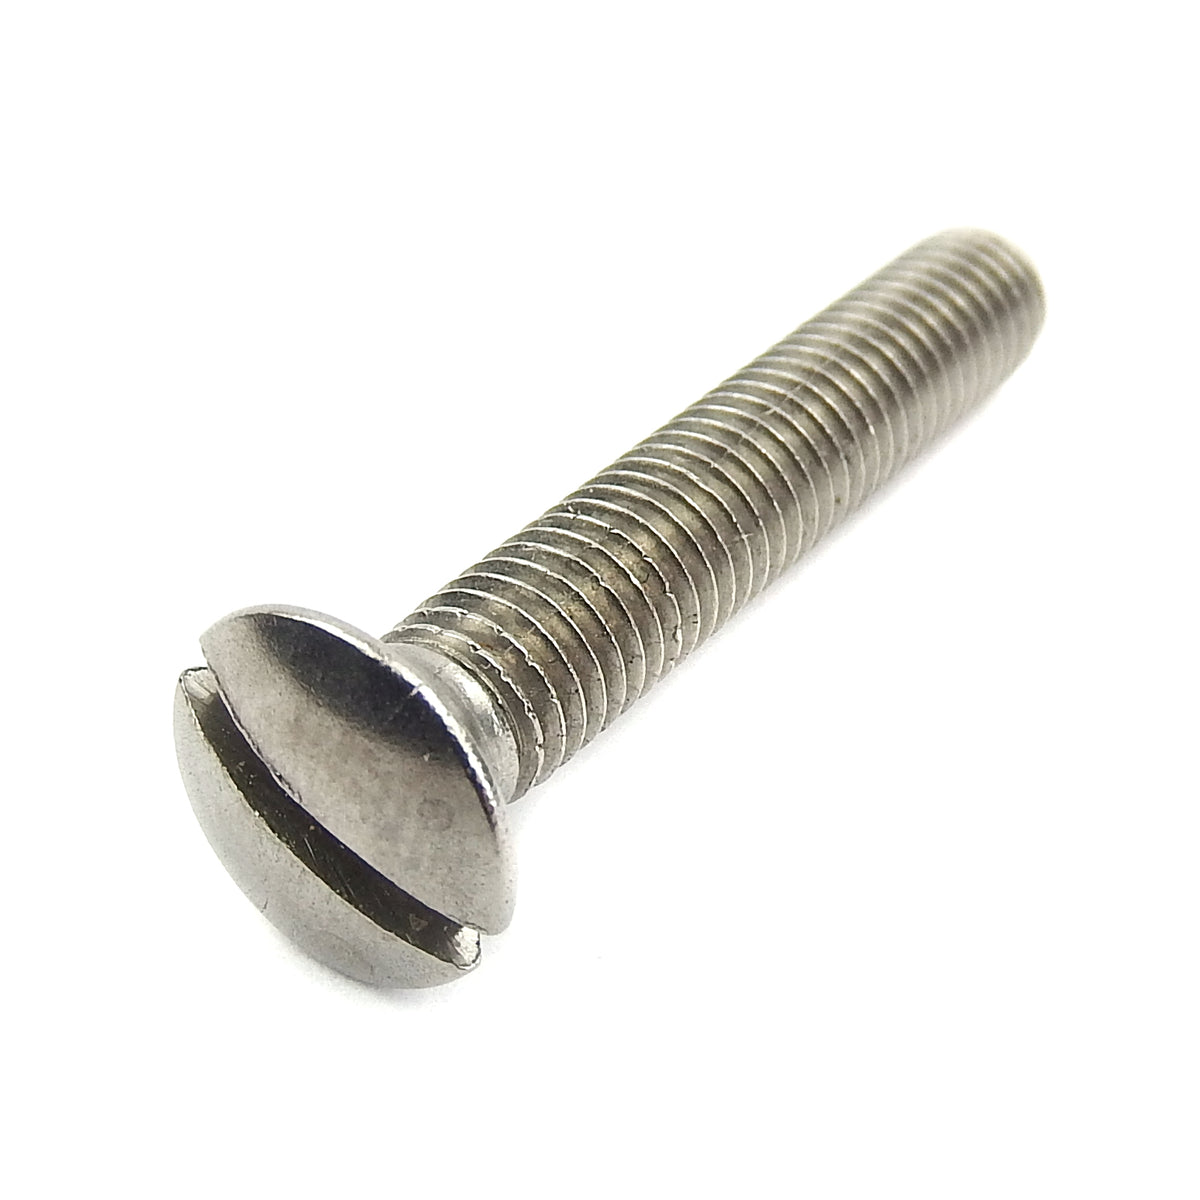 Counter Sunk Raised Screw M5 x 25mm Stainless